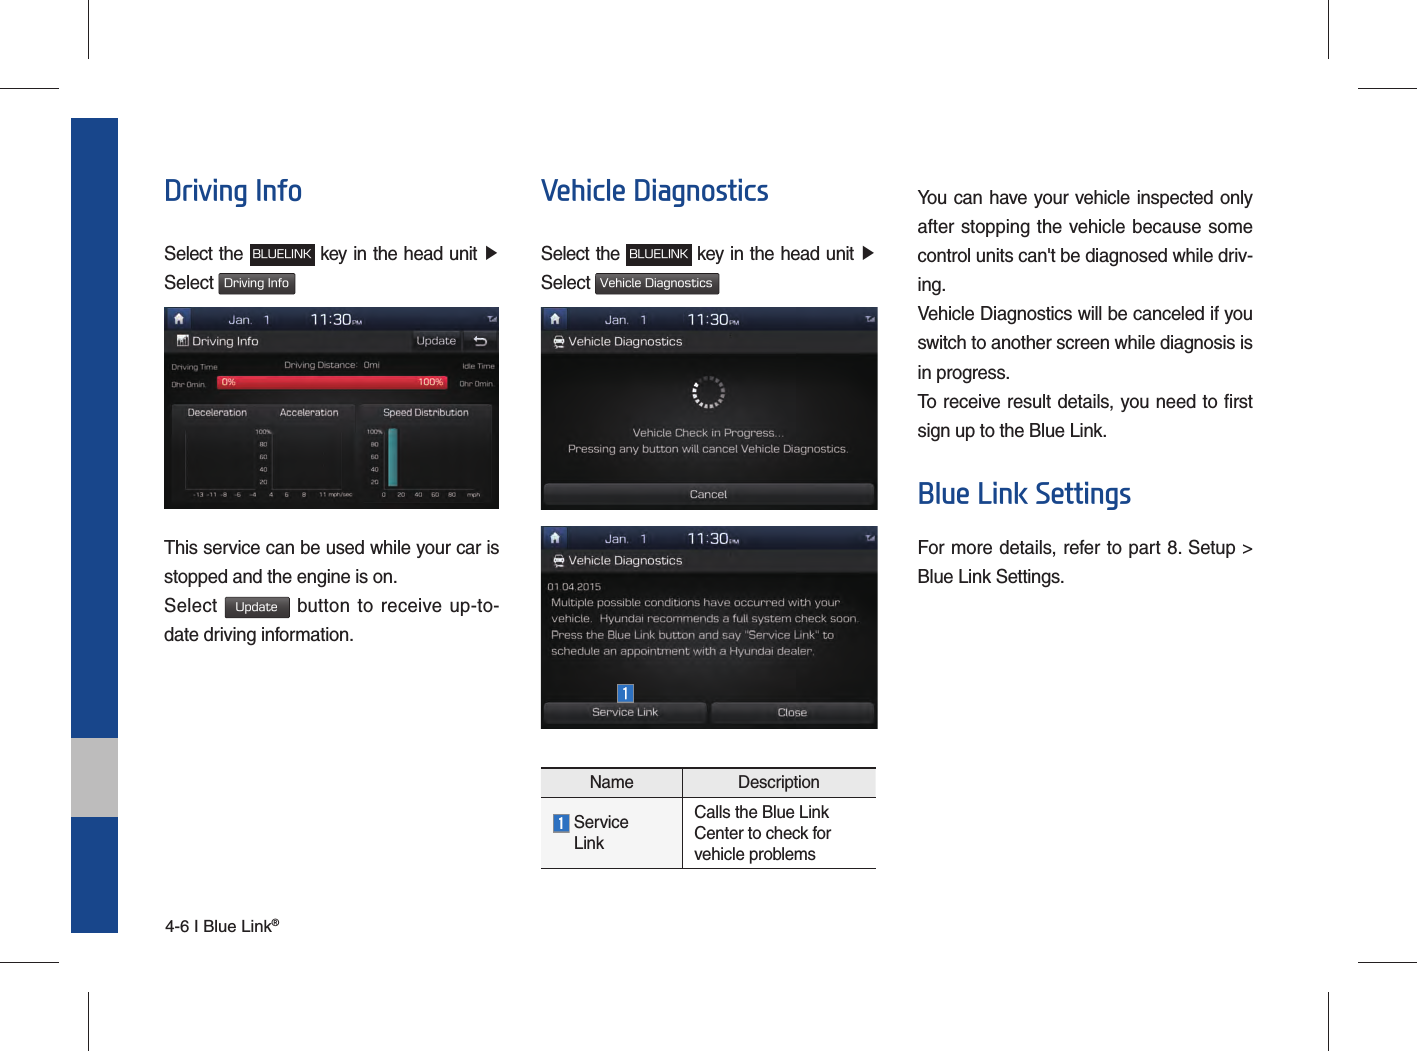 4-6 I Blue Link®Driving InfoSelect the BLUELINK key in the head unit ▶ Select Driving Info This service can be used while your car is stopped and the engine is on. Select Update button to receive up-to-date driving information. Vehicle DiagnosticsSelect the BLUELINK key in the head unit ▶ Select Vehicle Diagnostics Name Description  Service LinkCalls the Blue Link Center to check for vehicle problemsYou can have your vehicle inspected only after stopping the vehicle because some control units can&apos;t be diagnosed while driv-ing.Vehicle Diagnostics will be canceled if you switch to another screen while diagnosis is in progress.To receive result details, you need to first sign up to the Blue Link.Blue Link SettingsFor more details, refer to part 8. Setup &gt; Blue Link Settings.